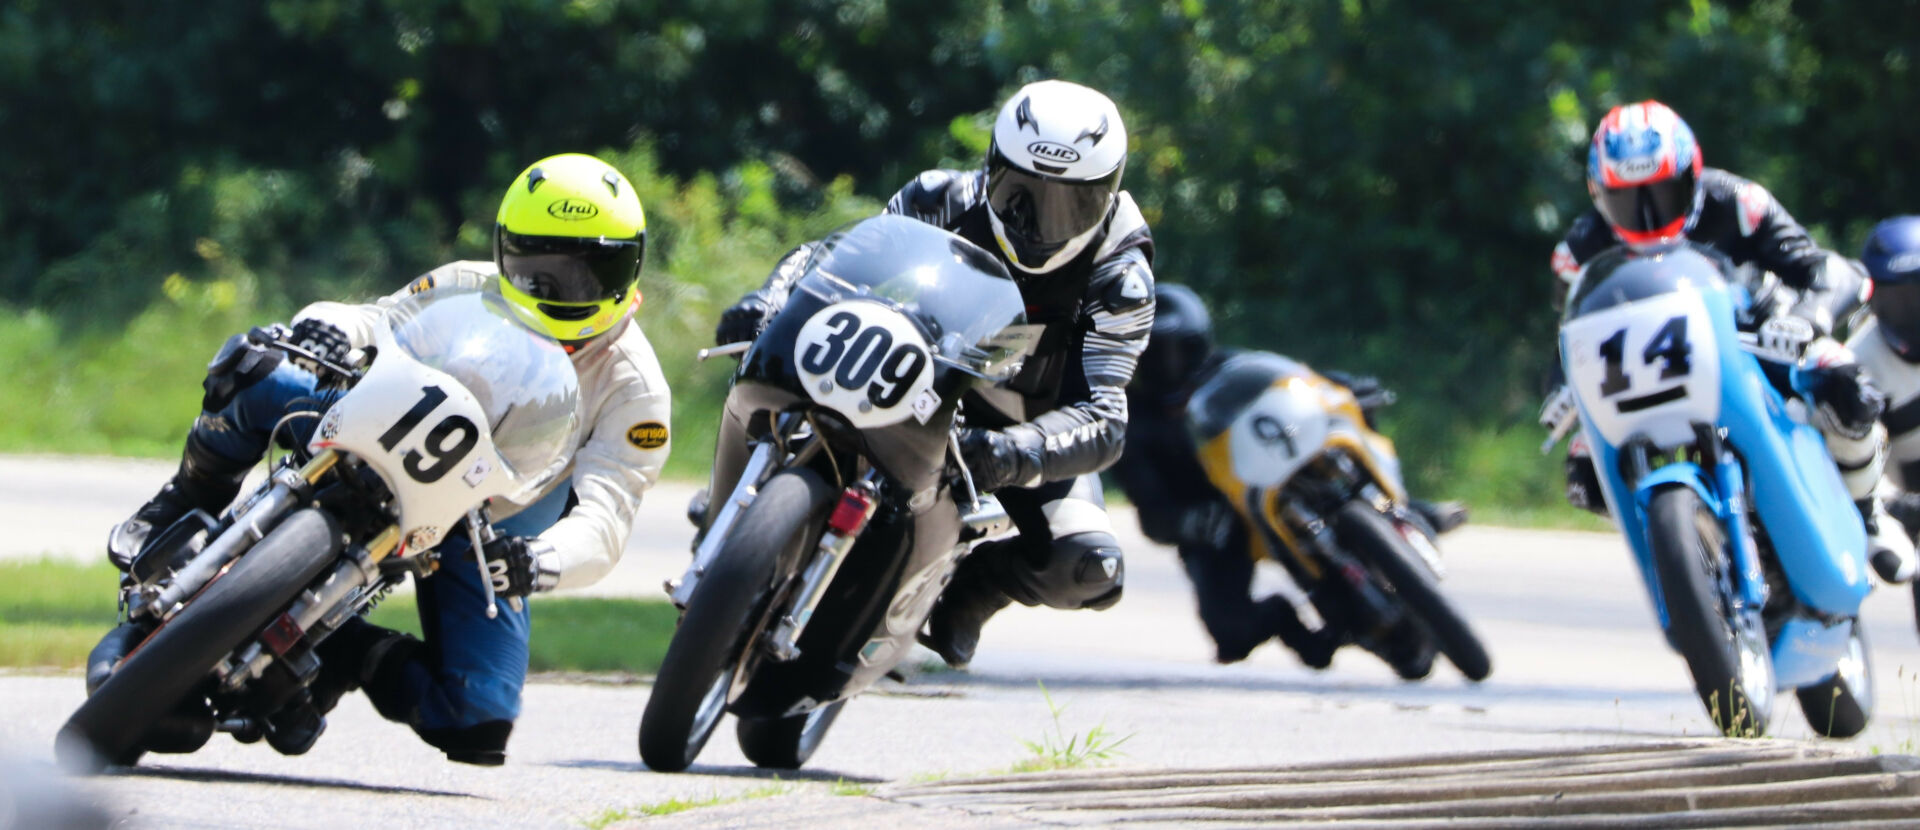 Christopher Spargo (19) leads Tim Joyce (309), Shane Turpin (14), and Colton Roberts (9) during an AHRMA Vintage Cup race at Blackhawk Farms Raceway, in Illinois. Photo by Craig Chawla, courtesy AHRMA.